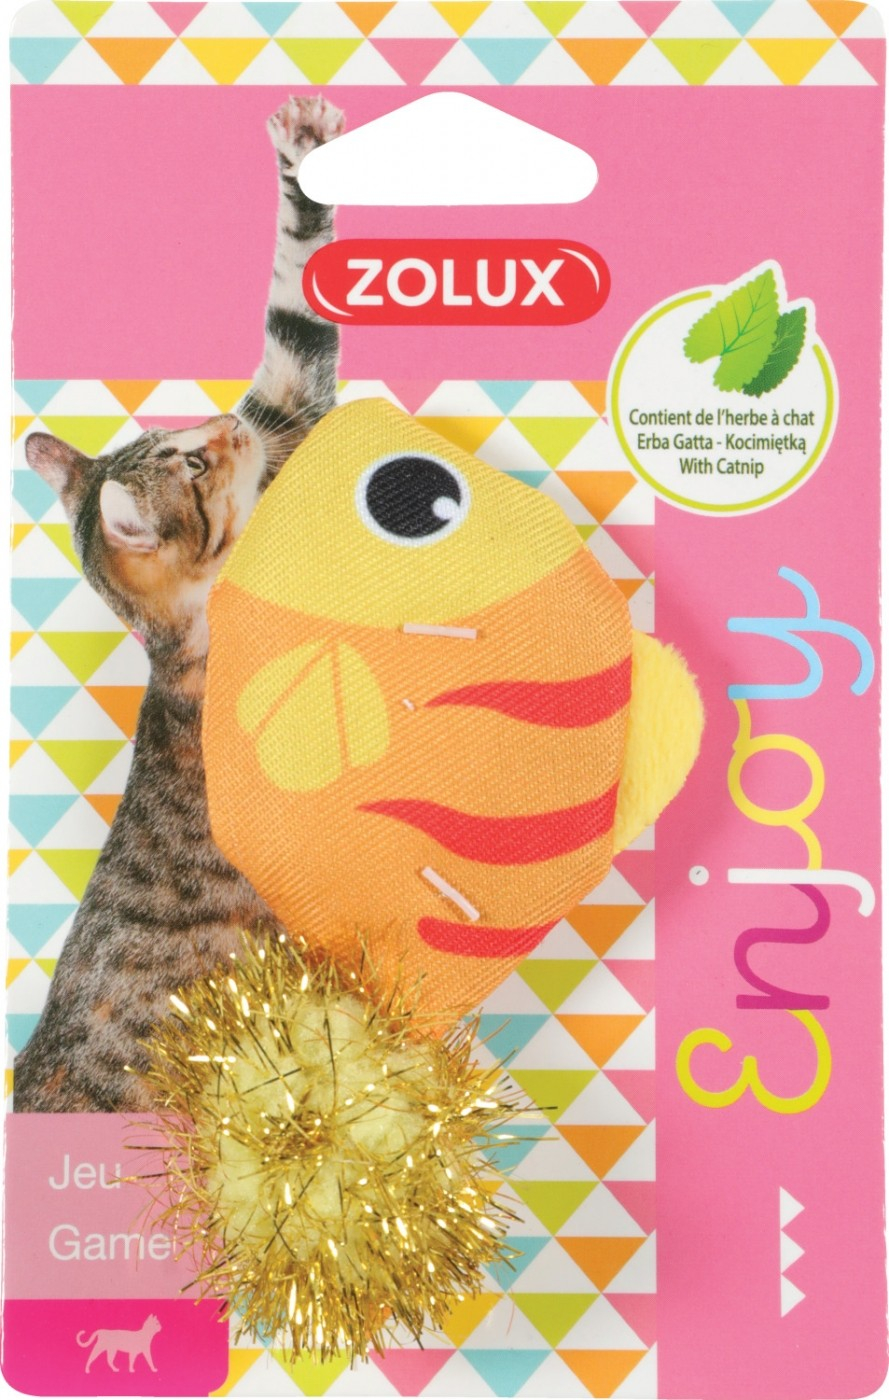 Zolux Jouet chat Lovely avec herbe à chat - Poisson